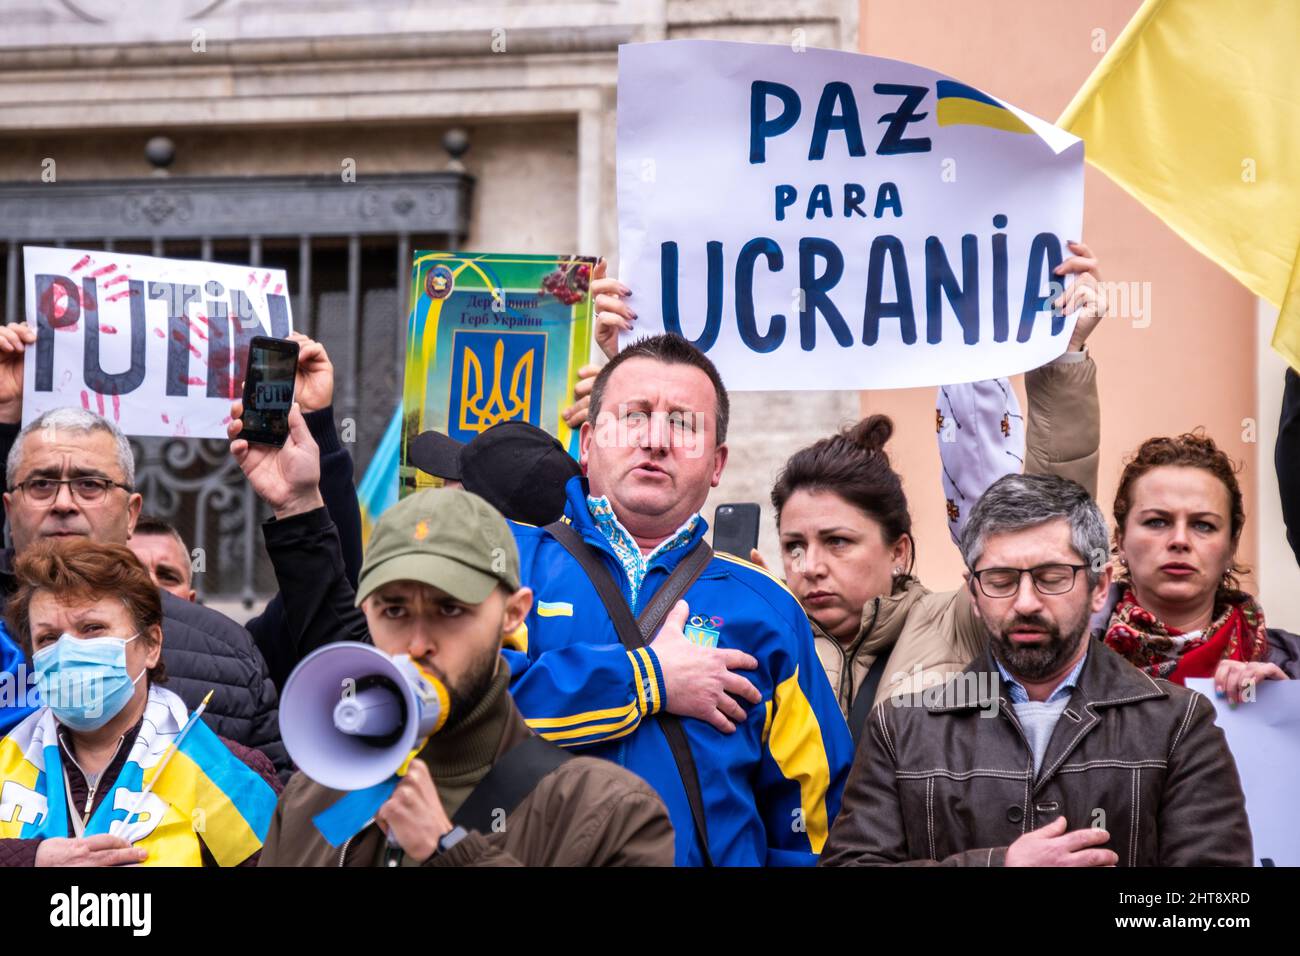 Valencia, Spain; 27th Feb 2022: Demonstrators protest against the war during a demonstration against Russia's invasion of Ukraine. Credit: Media+Media/Alamy Live News Stock Photo